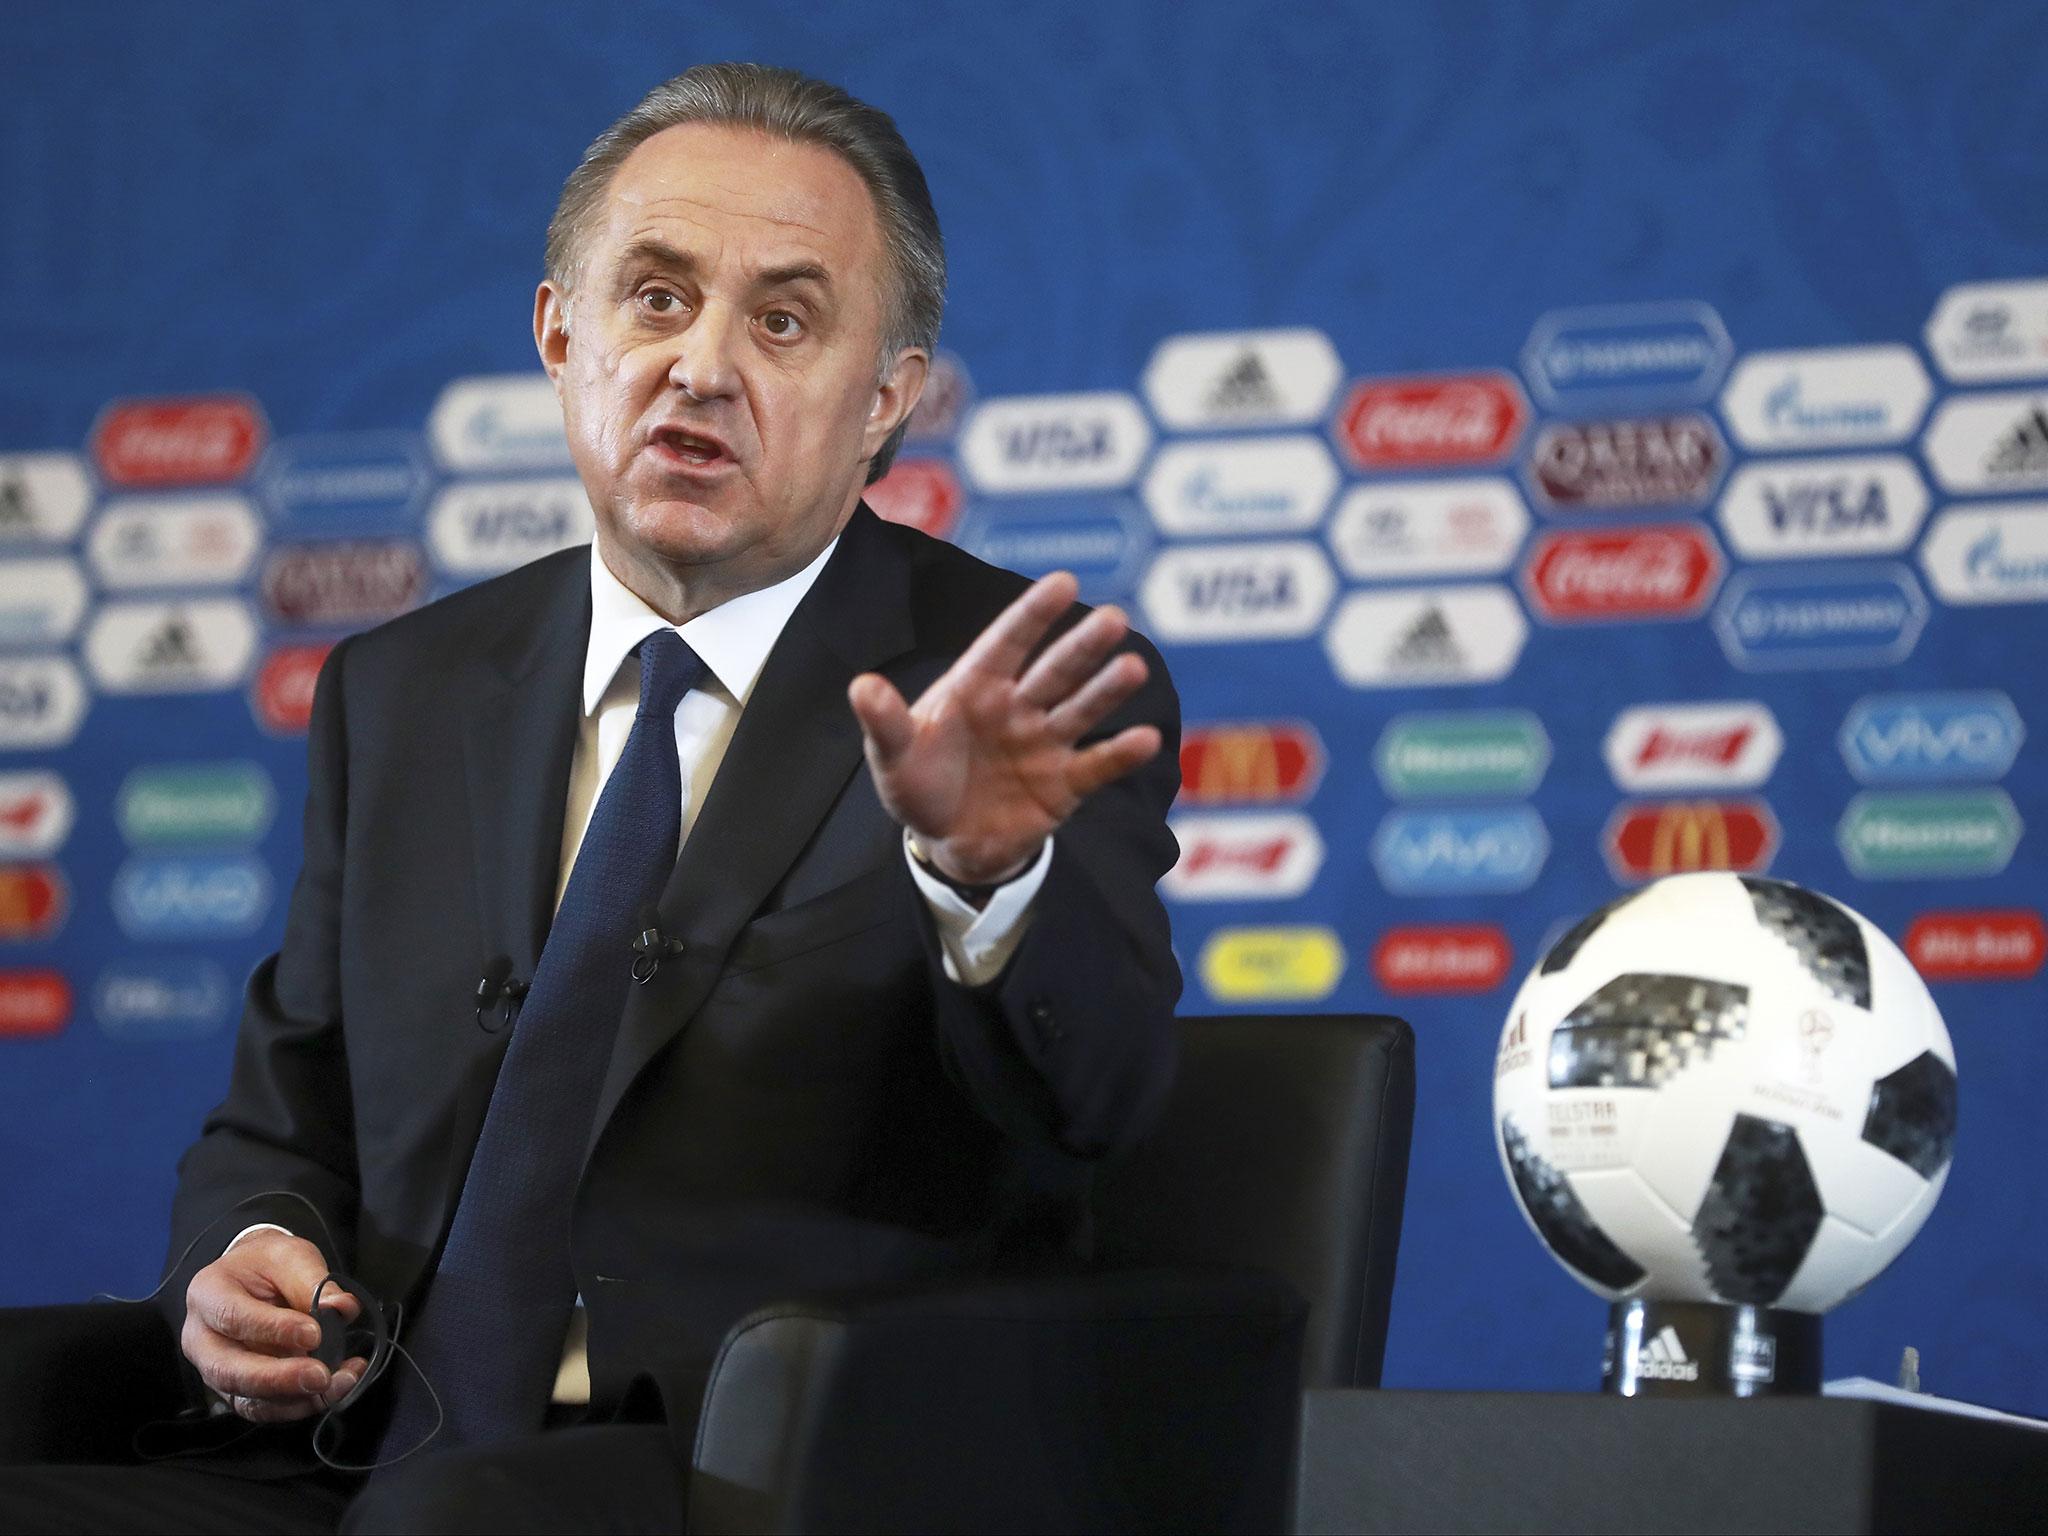 Vitaly Mutko was responsible for introducing the foreigner rule in Russian football